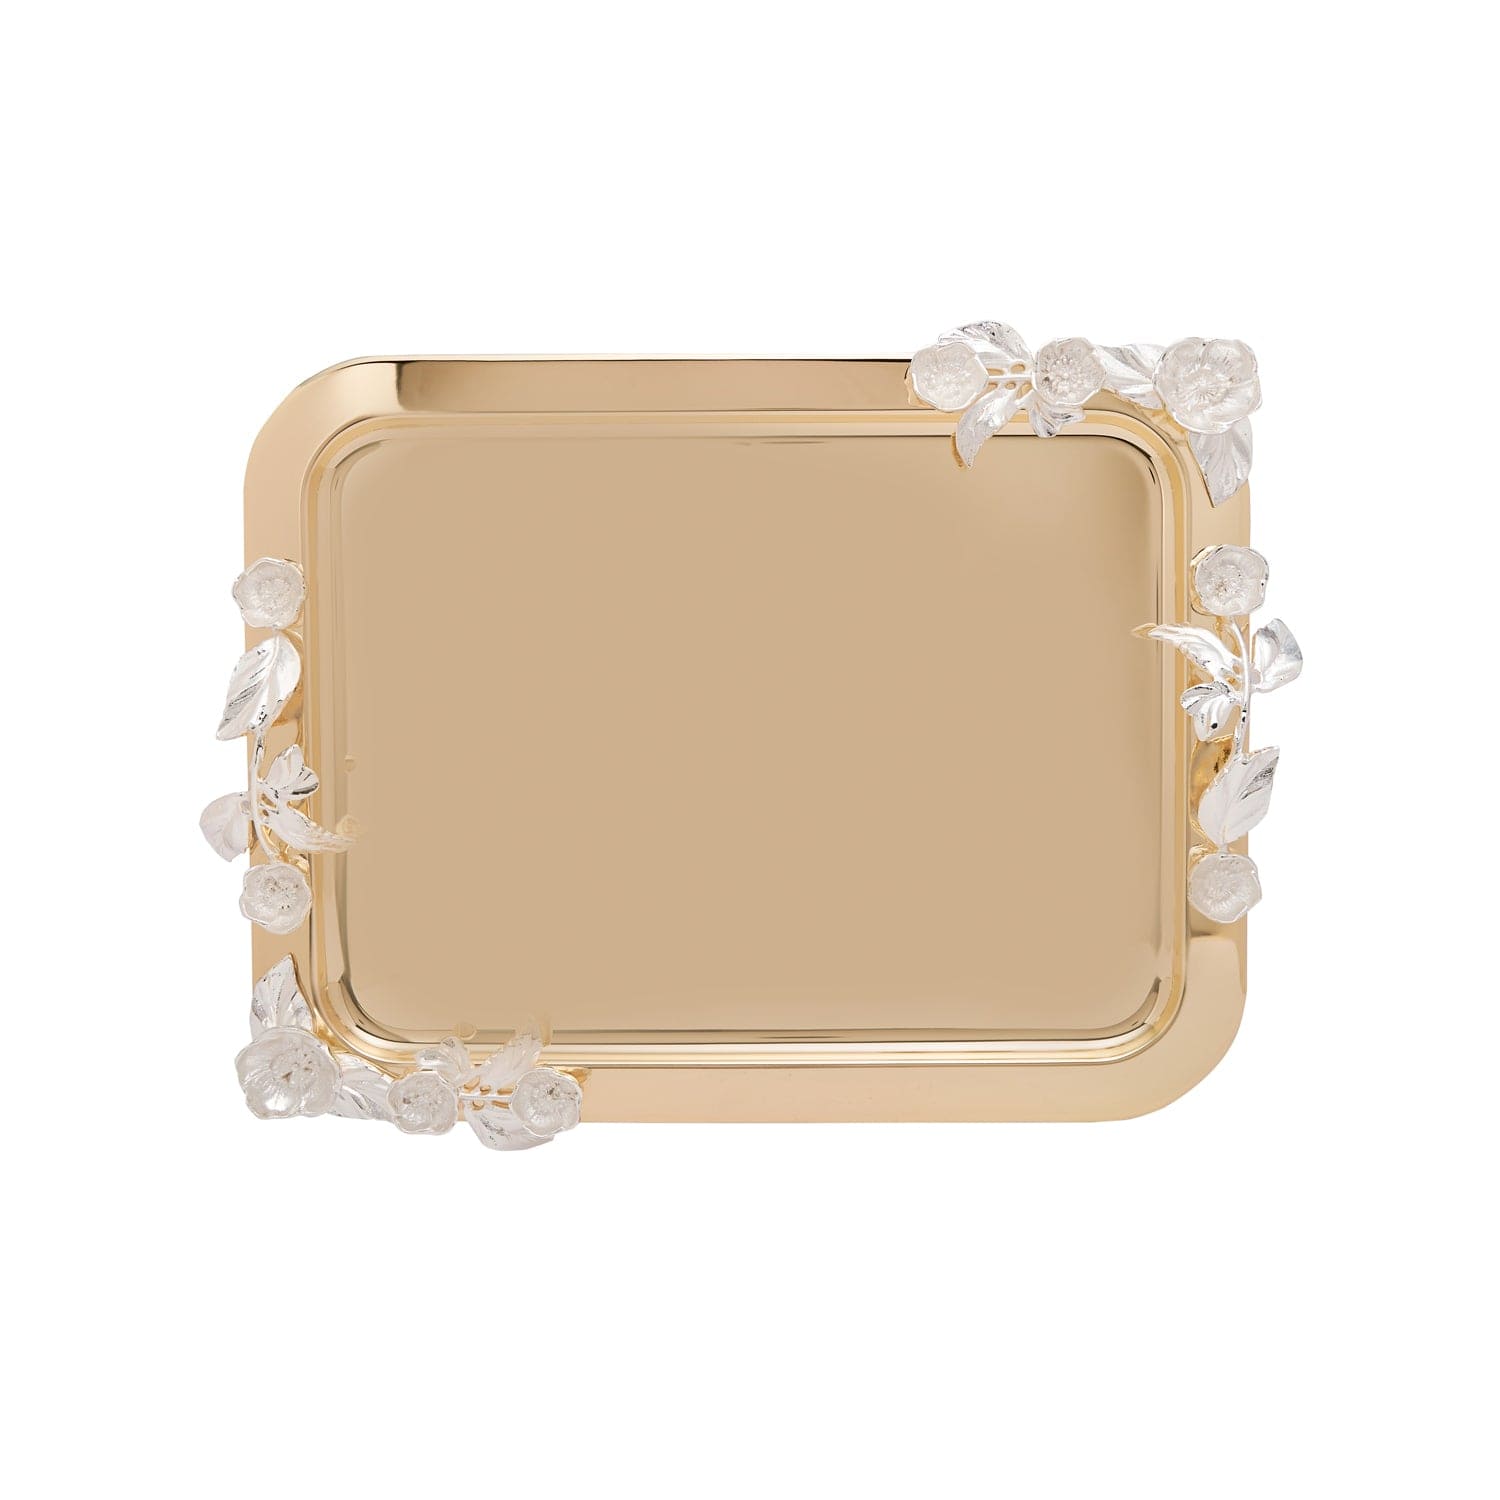 Pantazelos 4 Seasons Of Blossoms Goldplated and Silverplated Rectangular Medium Tray - 4333/GPSP